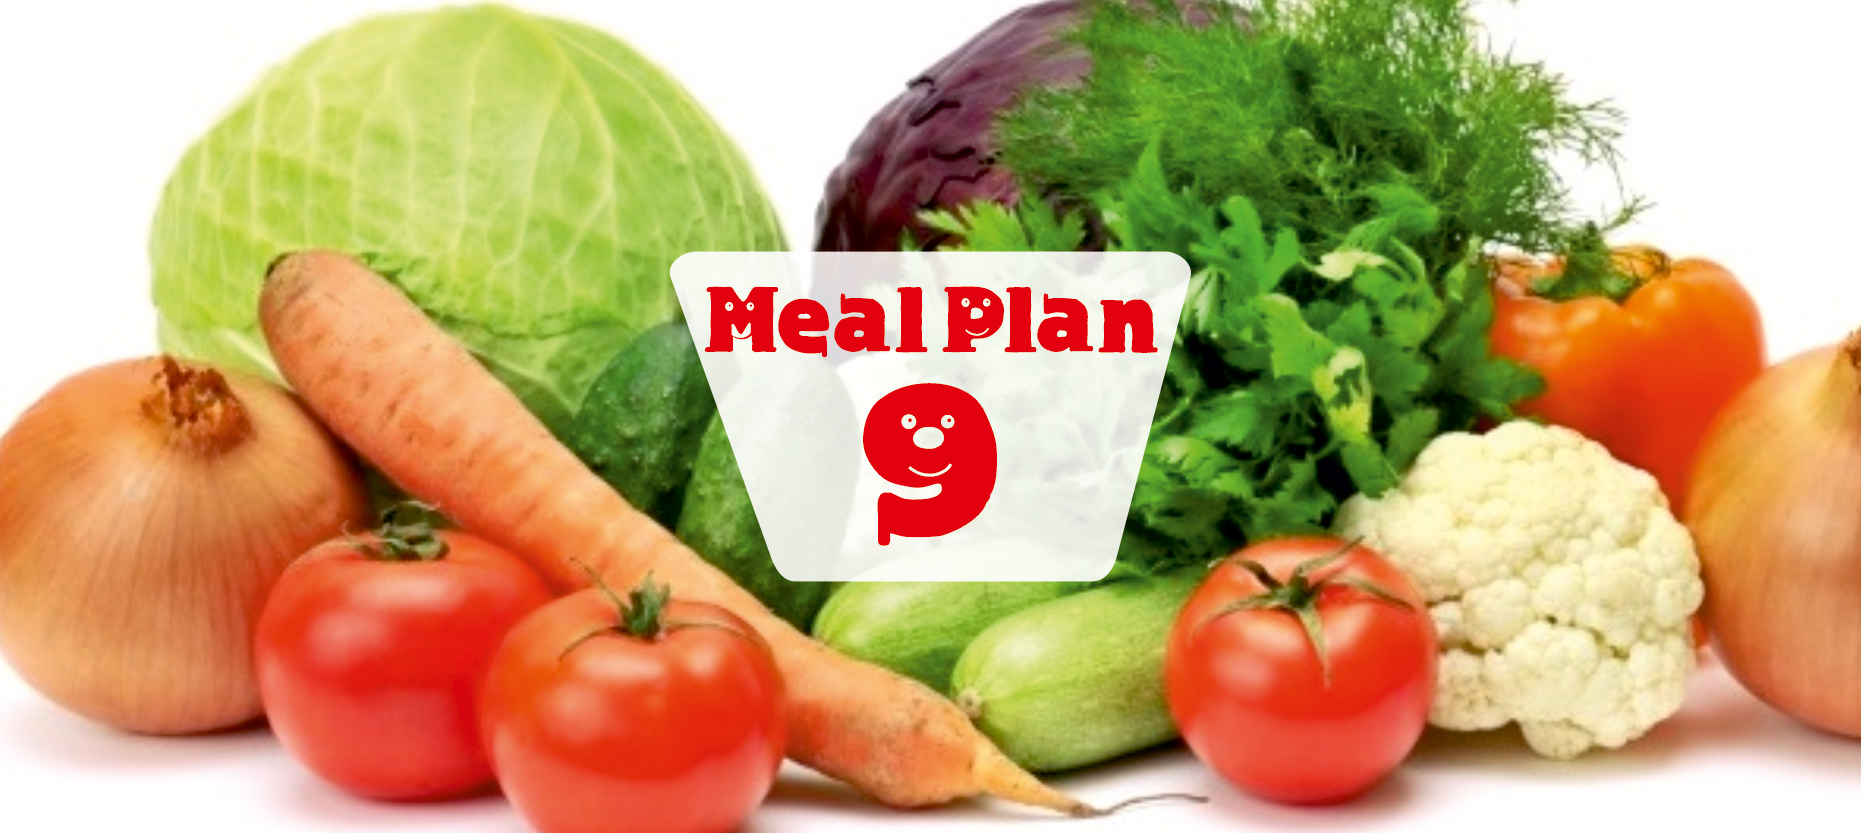 Balanced Sample Meal Plan-9 for Healthy Individuals